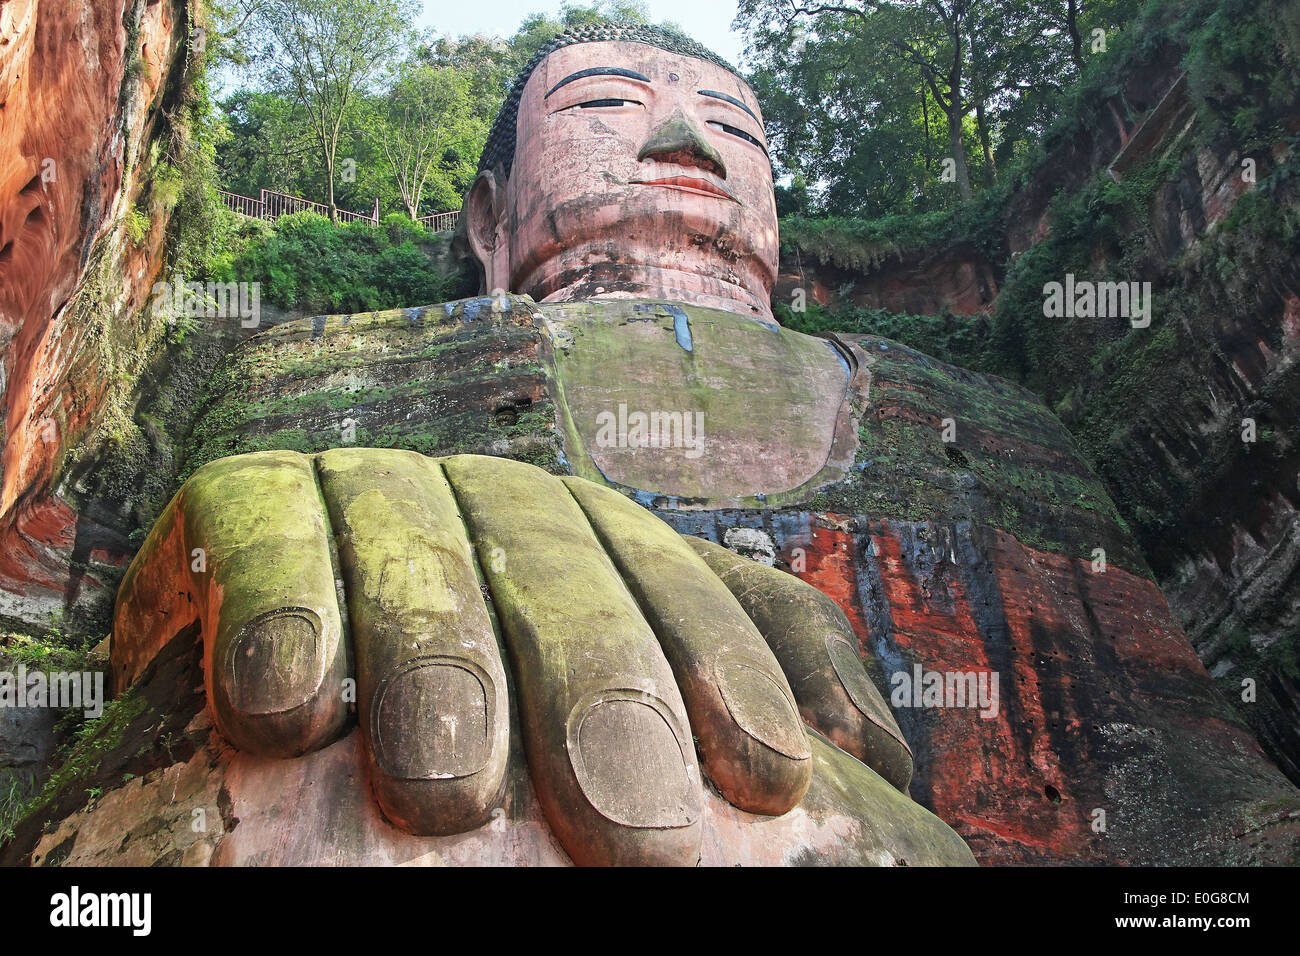 Leshan Giant Buddha is the largest stone Buddha in the world, 71 metres (233 feet) tall; Unesko World Heritage Site. Stock Photo